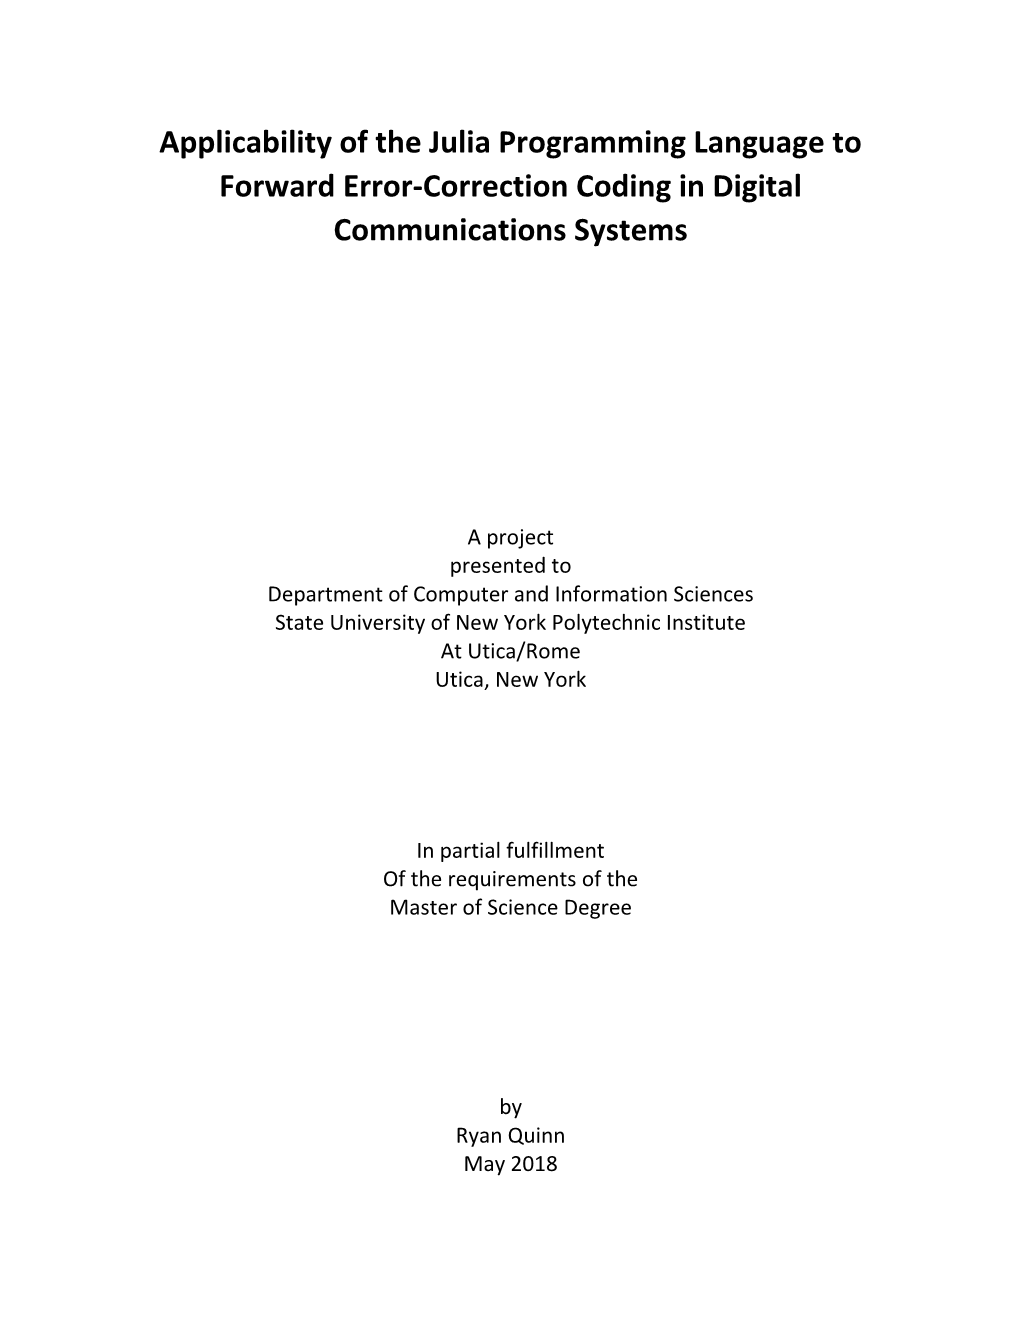 Applicability of the Julia Programming Language to Forward Error-Correction Coding in Digital Communications Systems